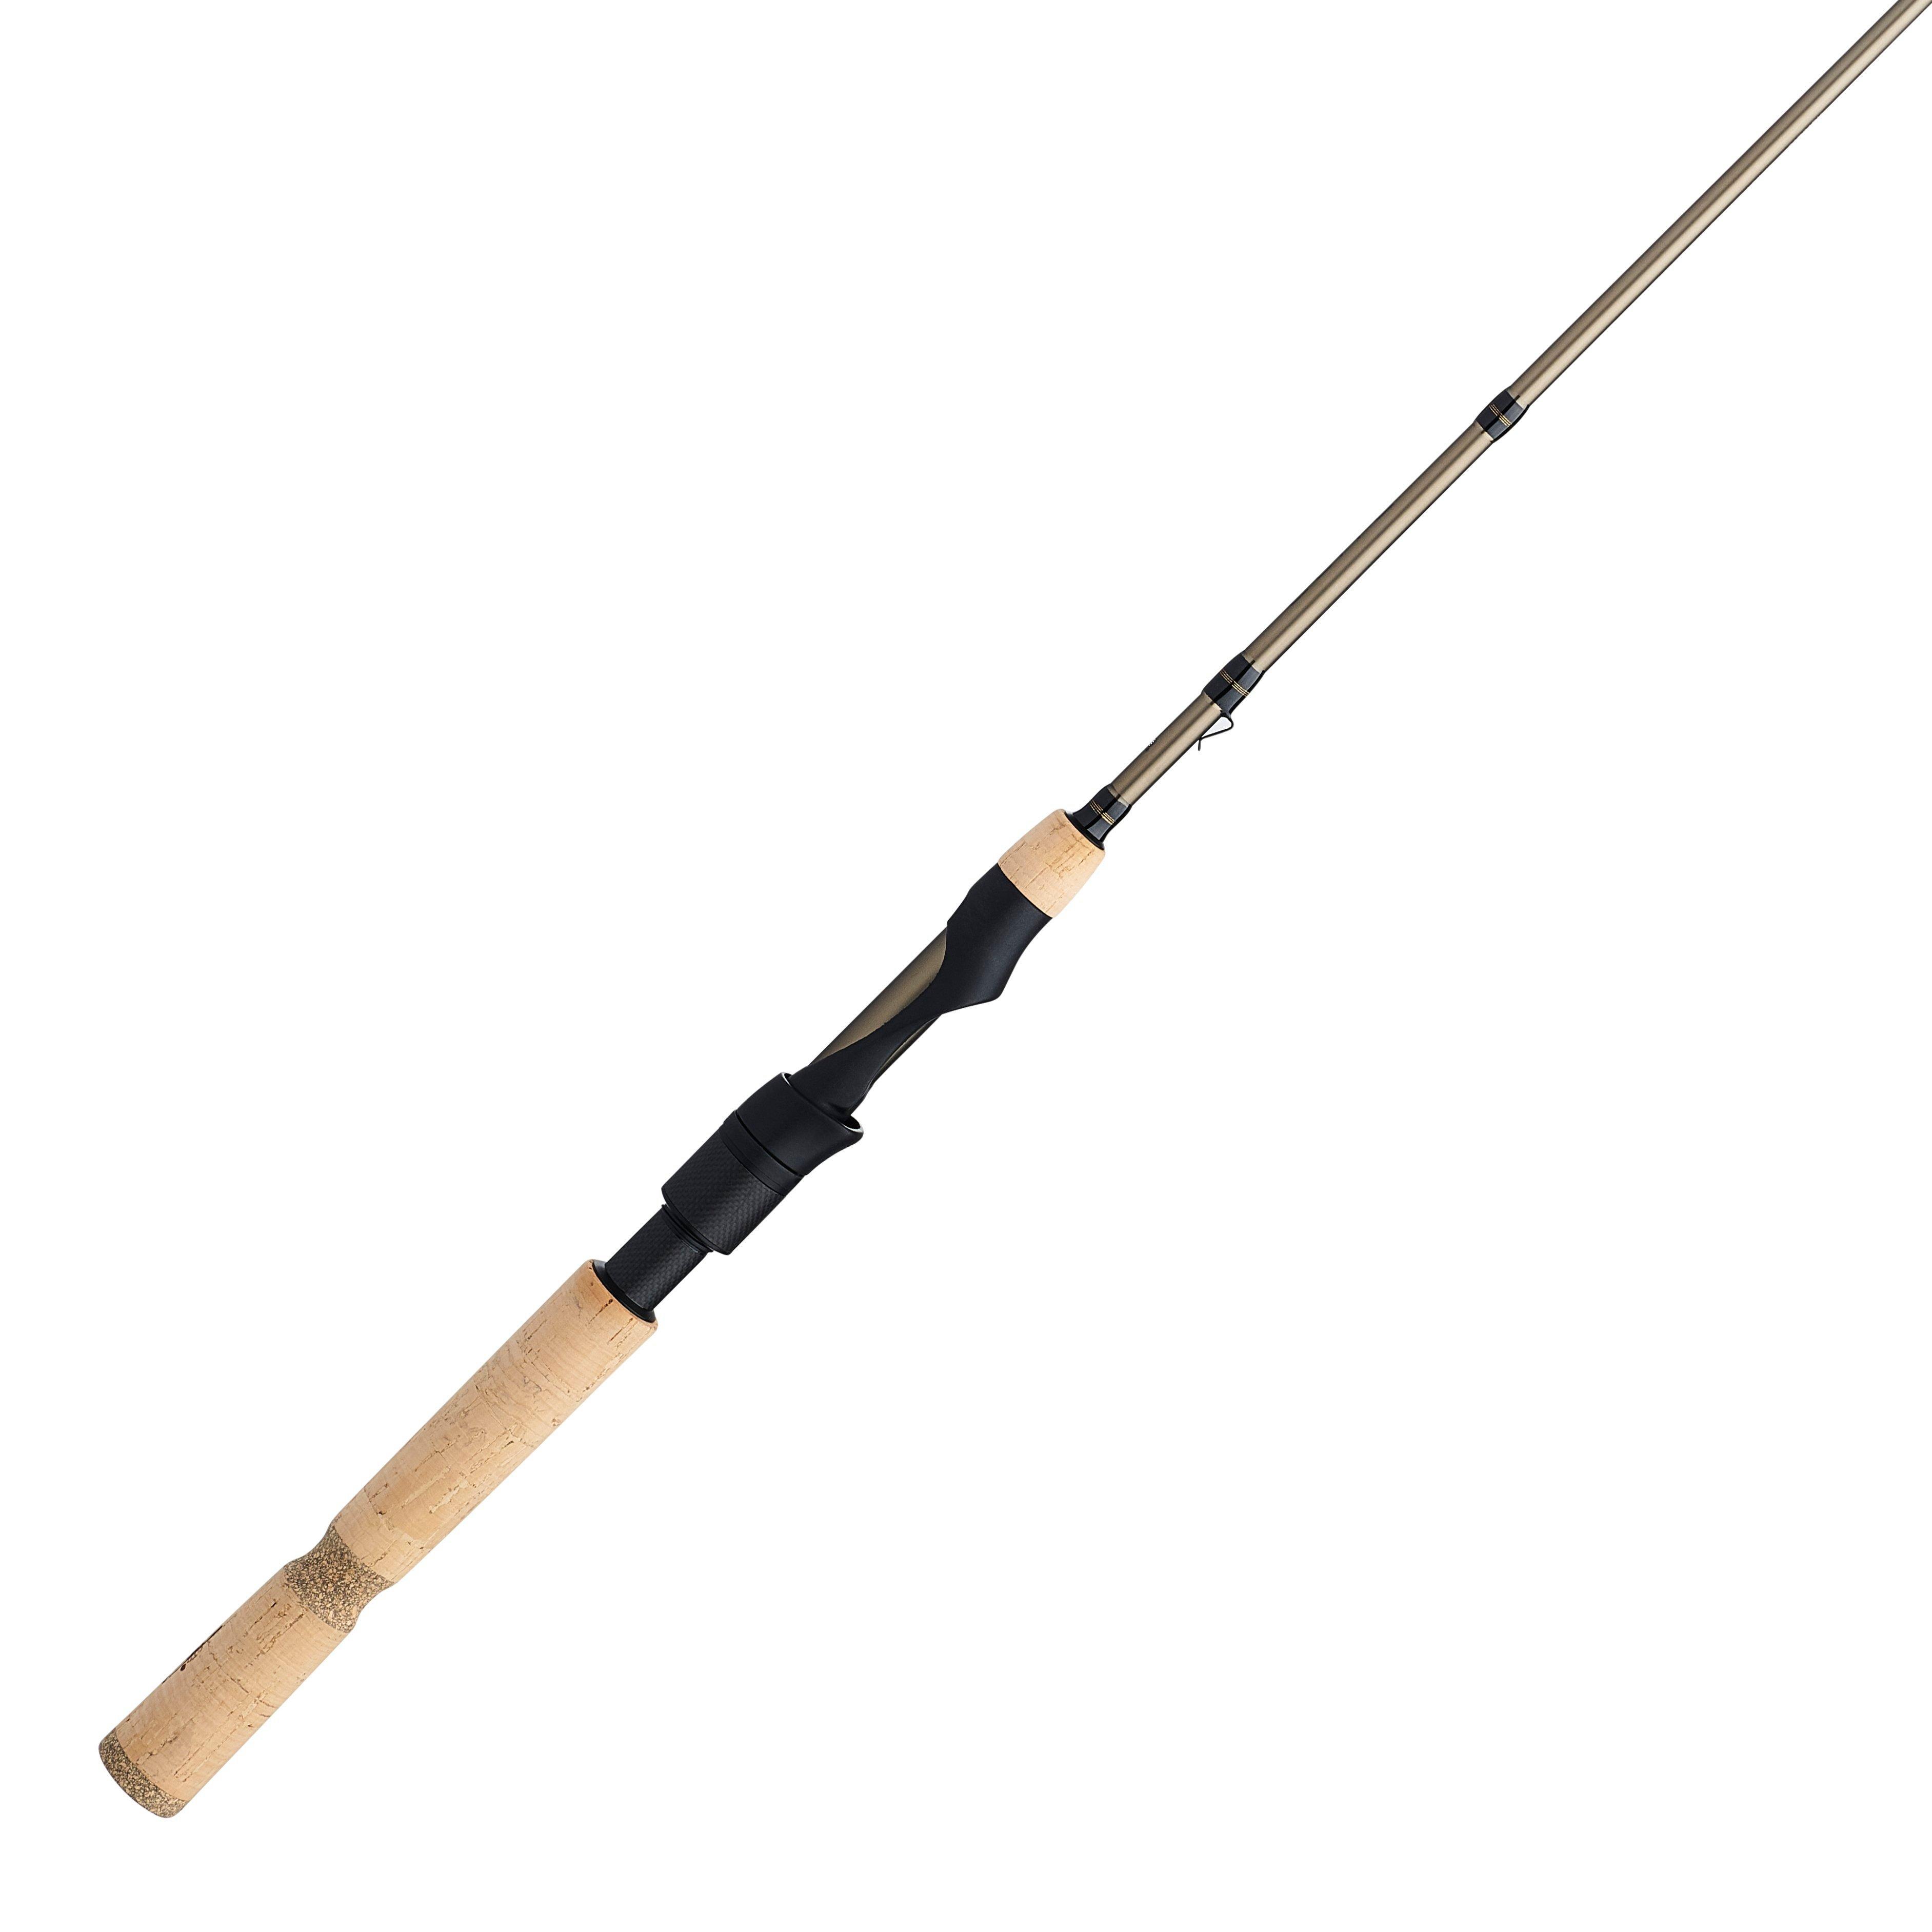 Fenwick HMG Spinning Rod  w/ Free Shipping and Handling